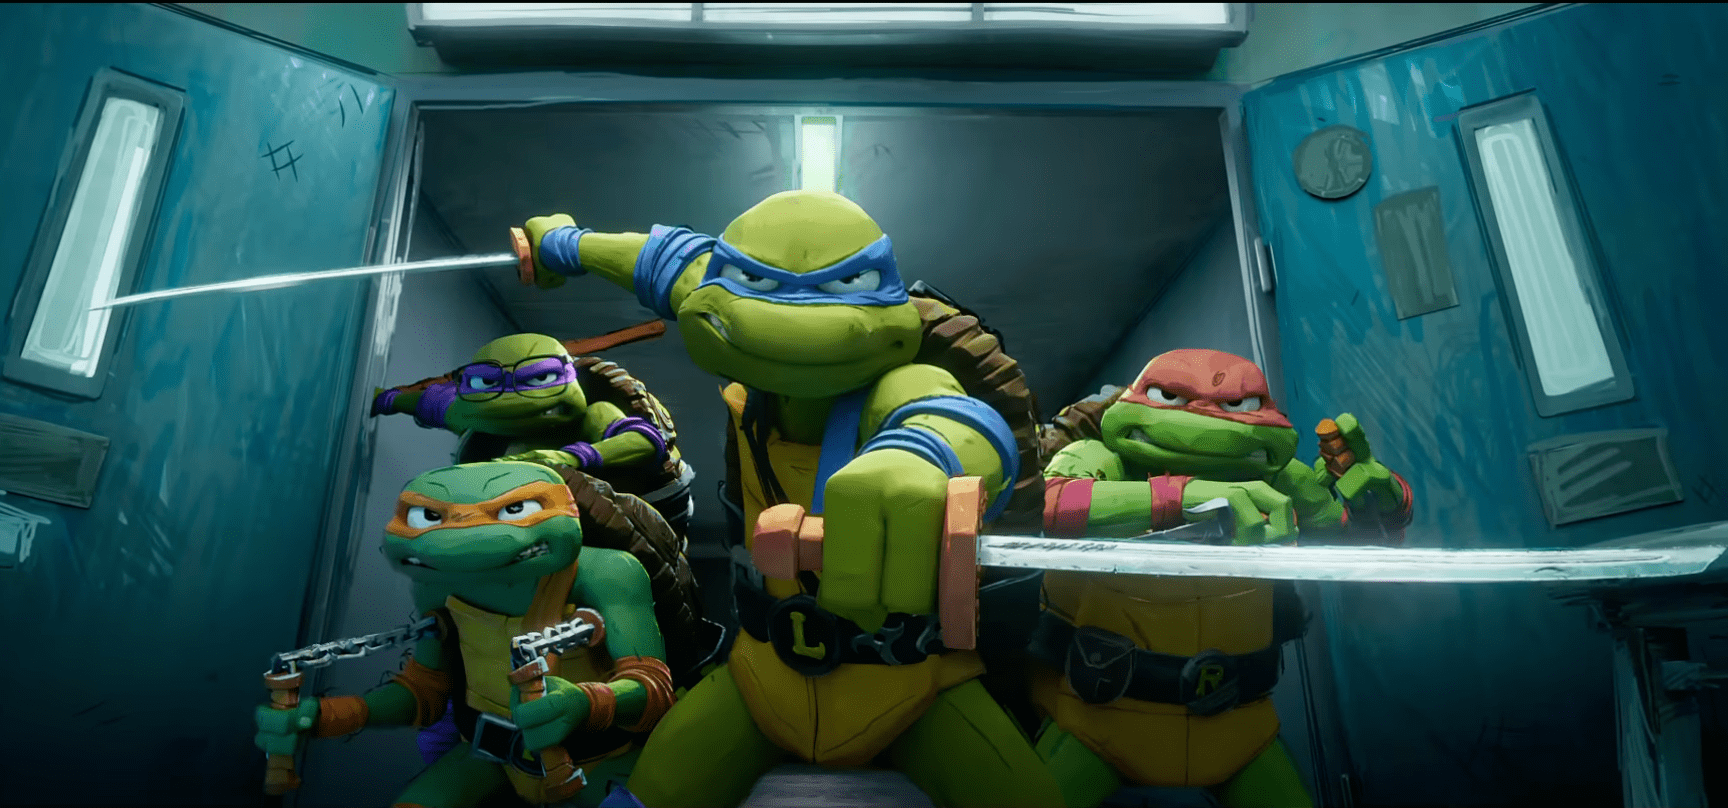 The Young Heroes In A Half Shell Battle Ice Cube’s Superfly In Latest ‘TMNT: Mutant Mayhem’ Trailer